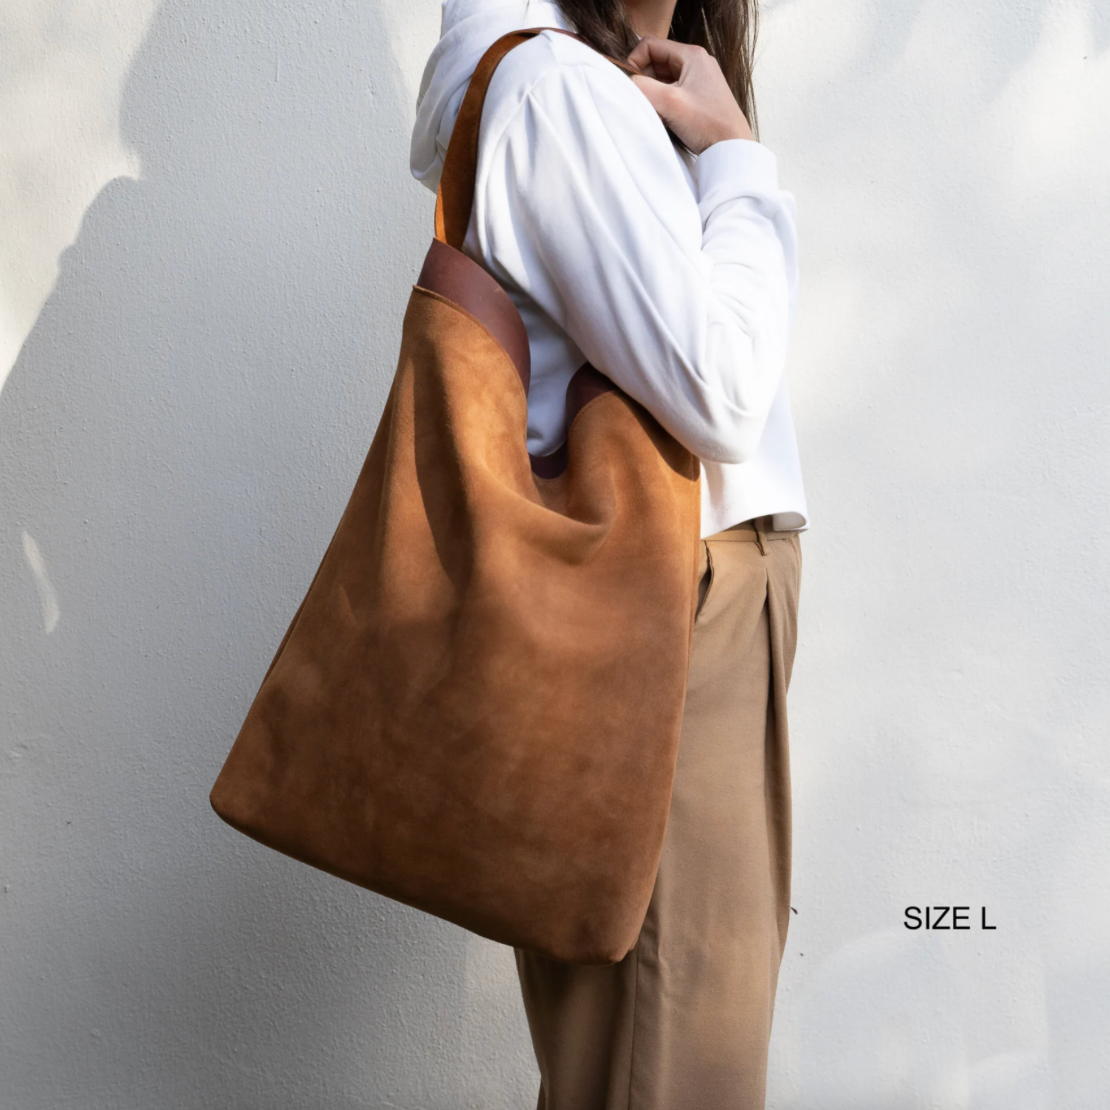 Sway Leather Tote Bag